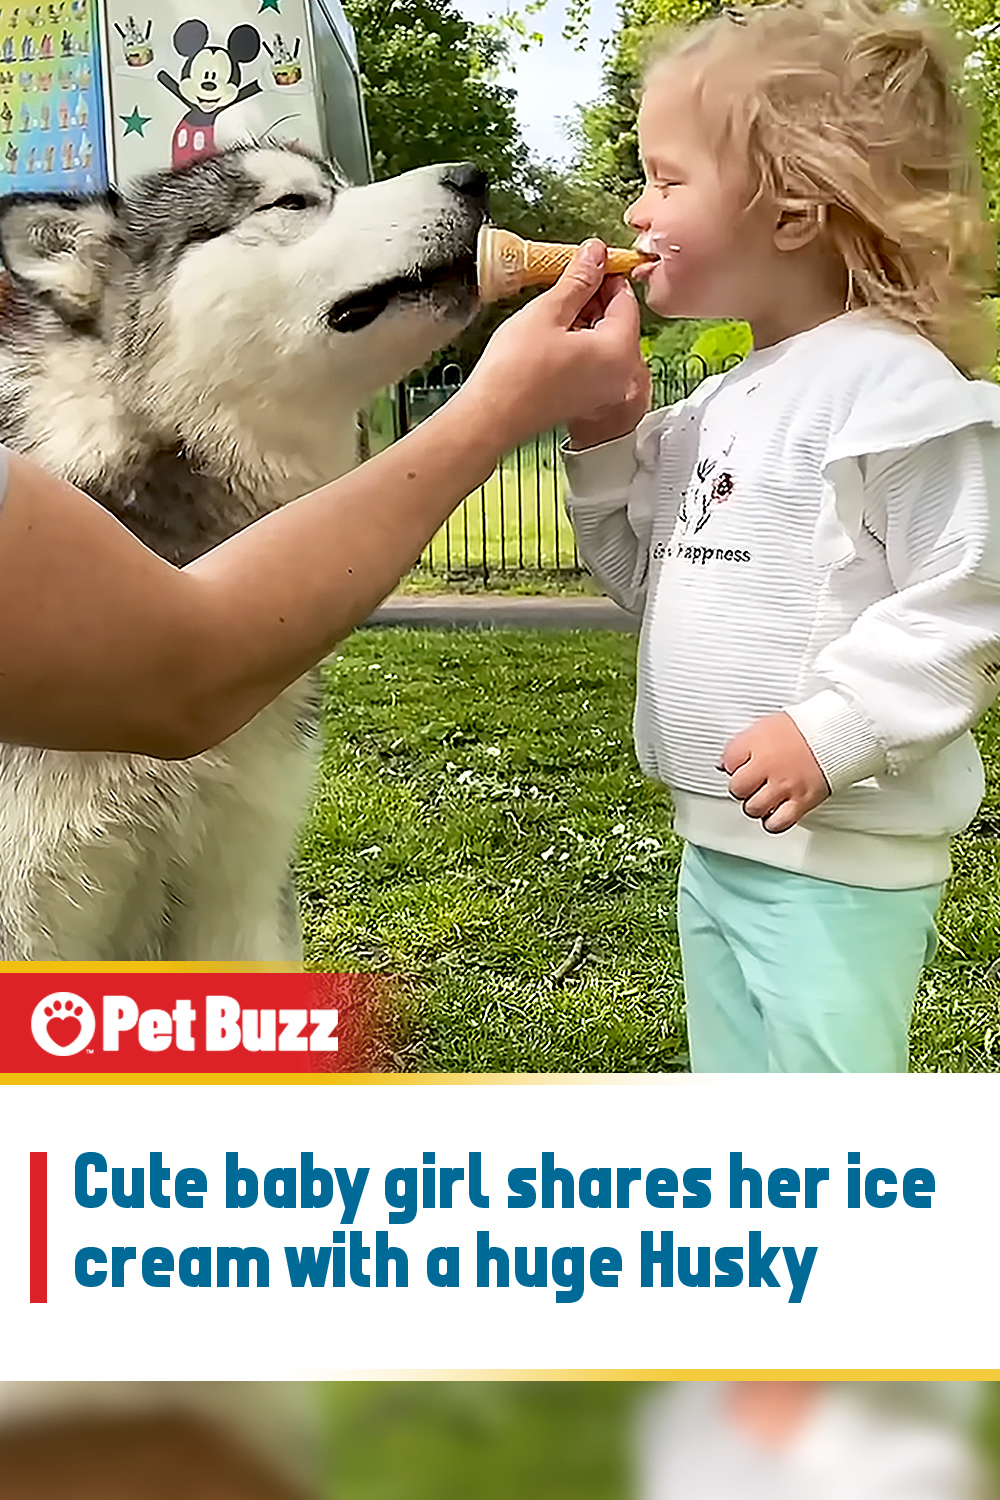 Cute baby girl shares her ice cream with a huge Husky